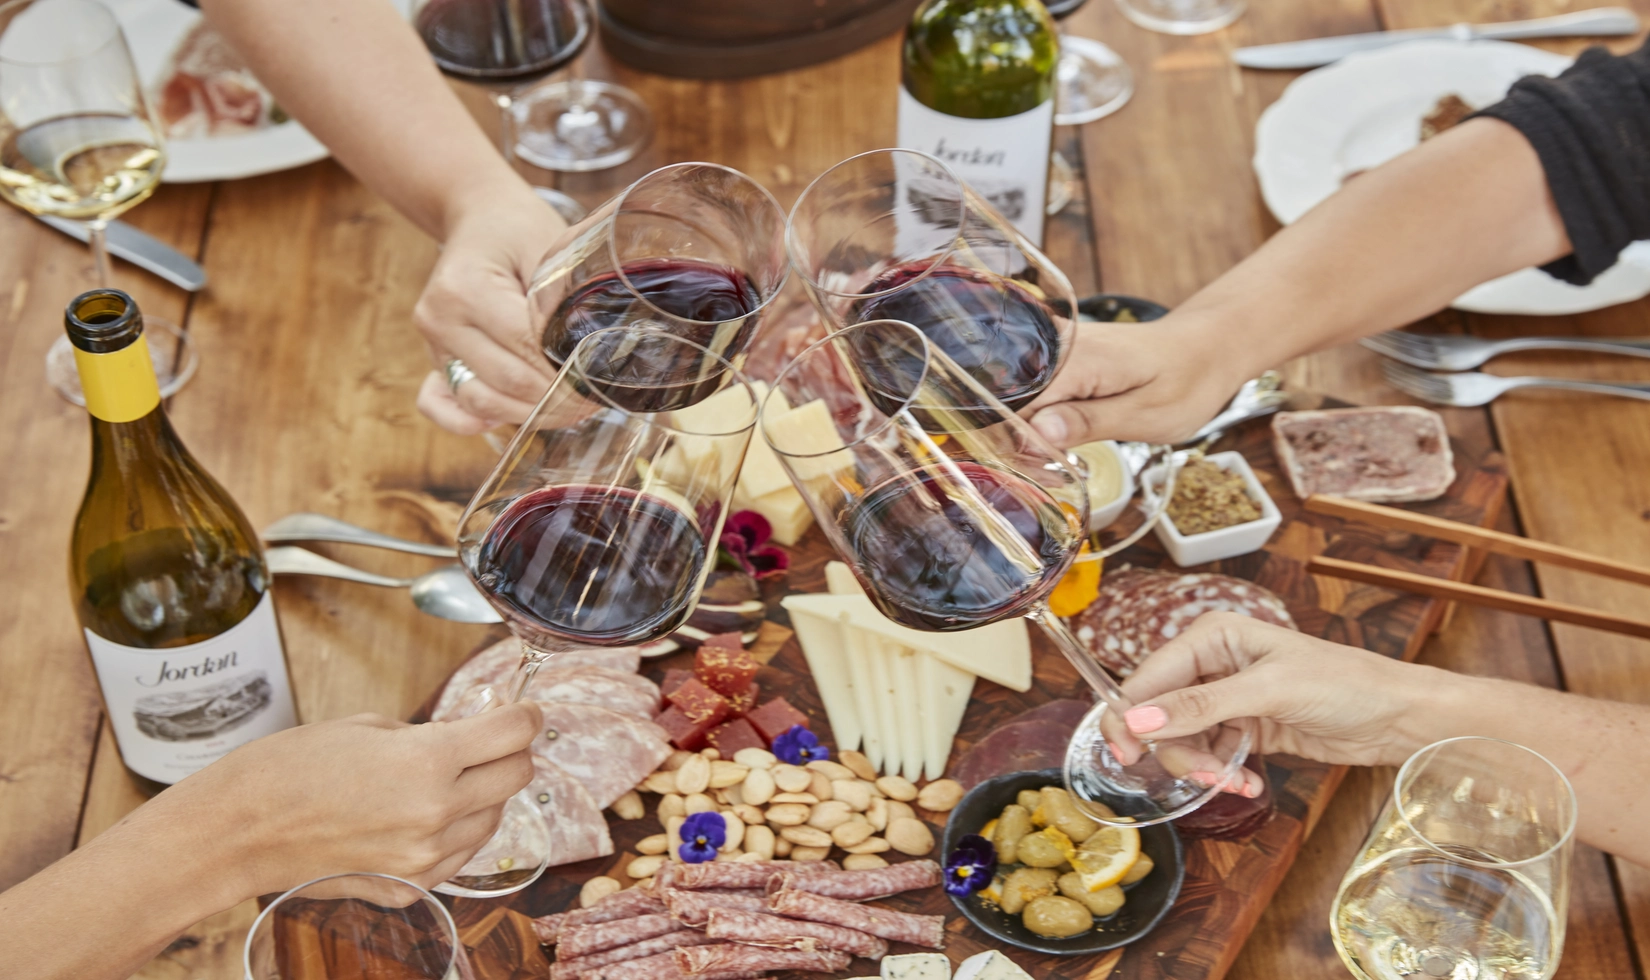 Group of four people toasting their wine together in a table